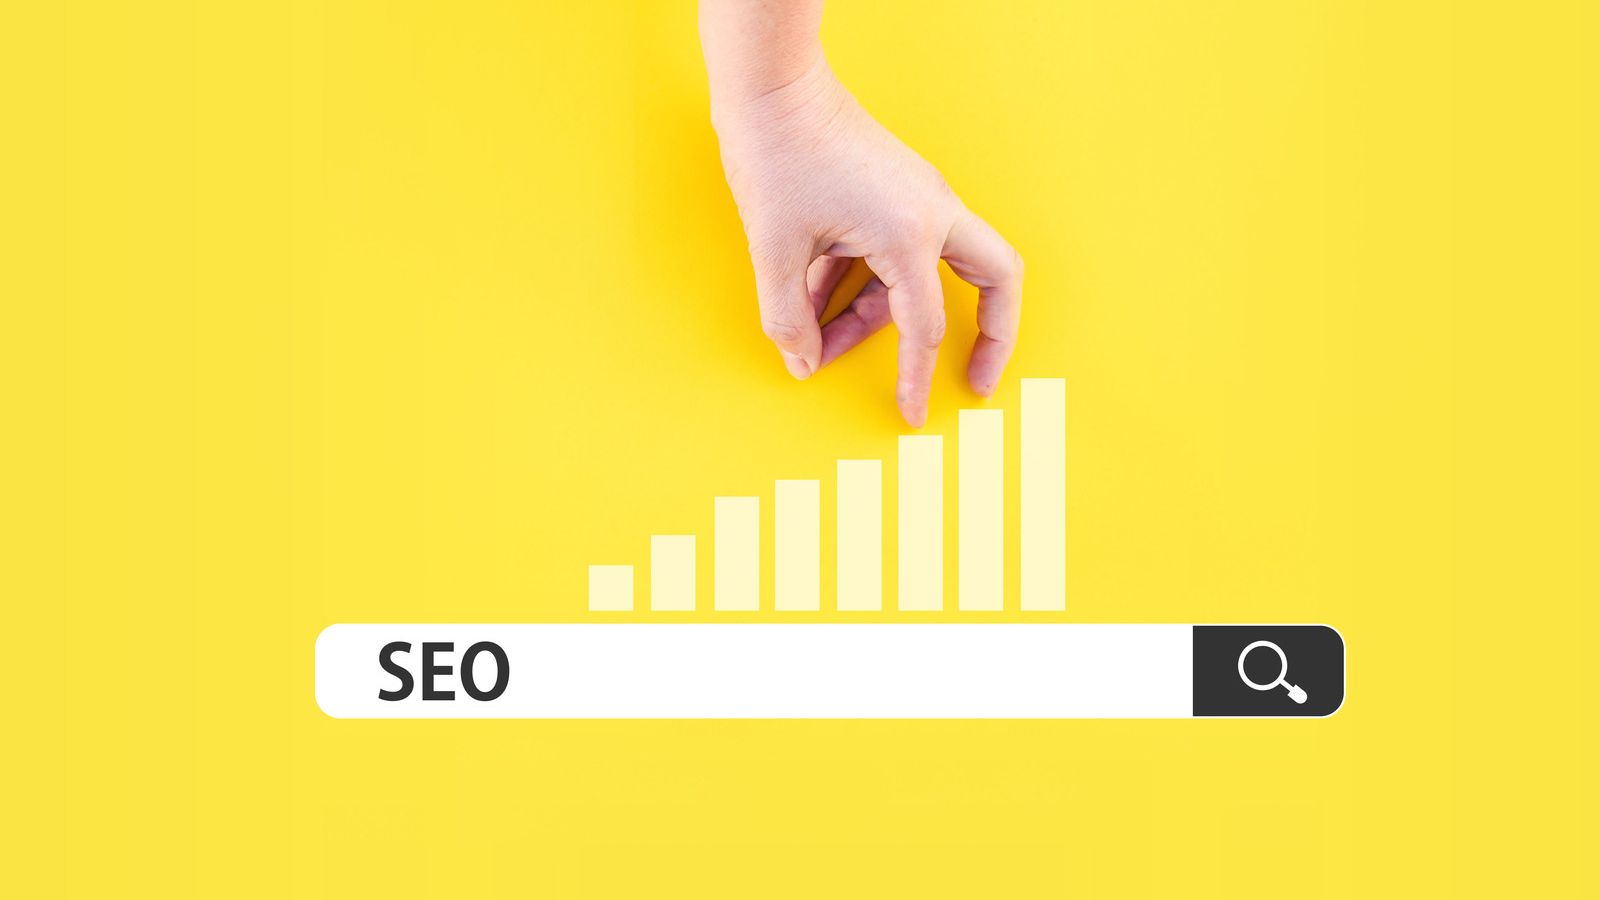 Importance of SEO for businesses